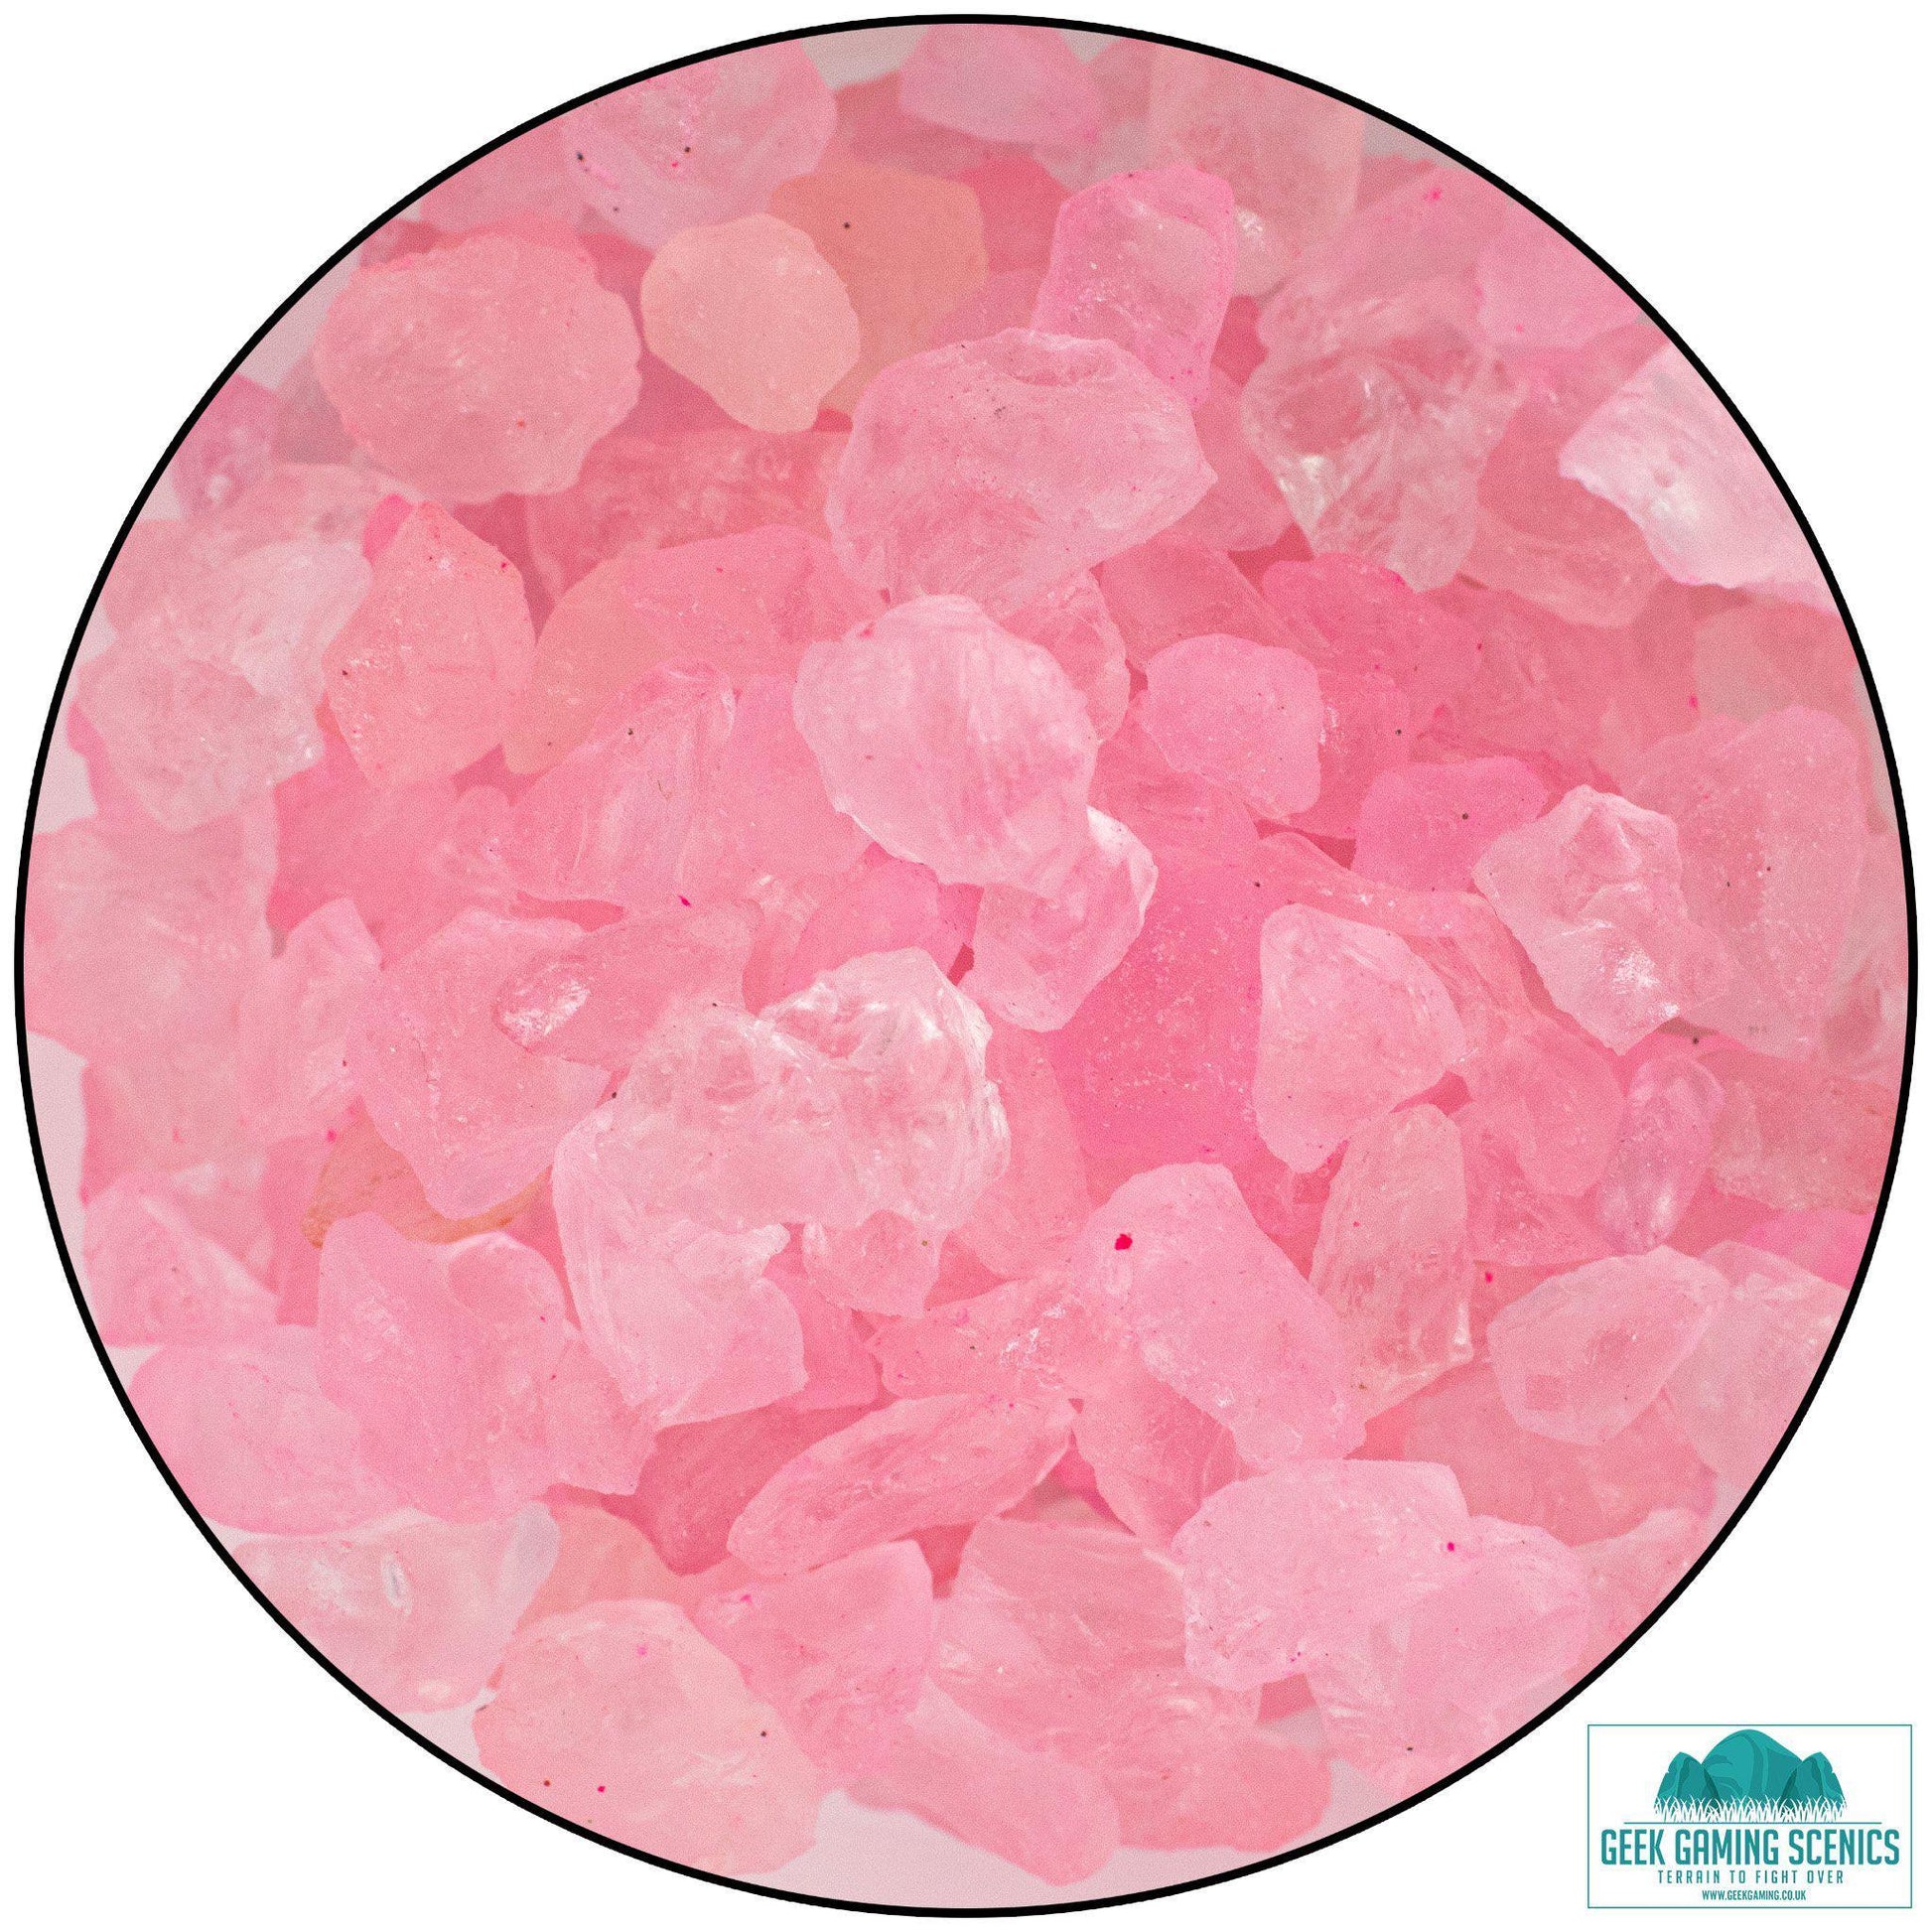 Weird Crystals Large - Pink - Geek Gaming Scenics